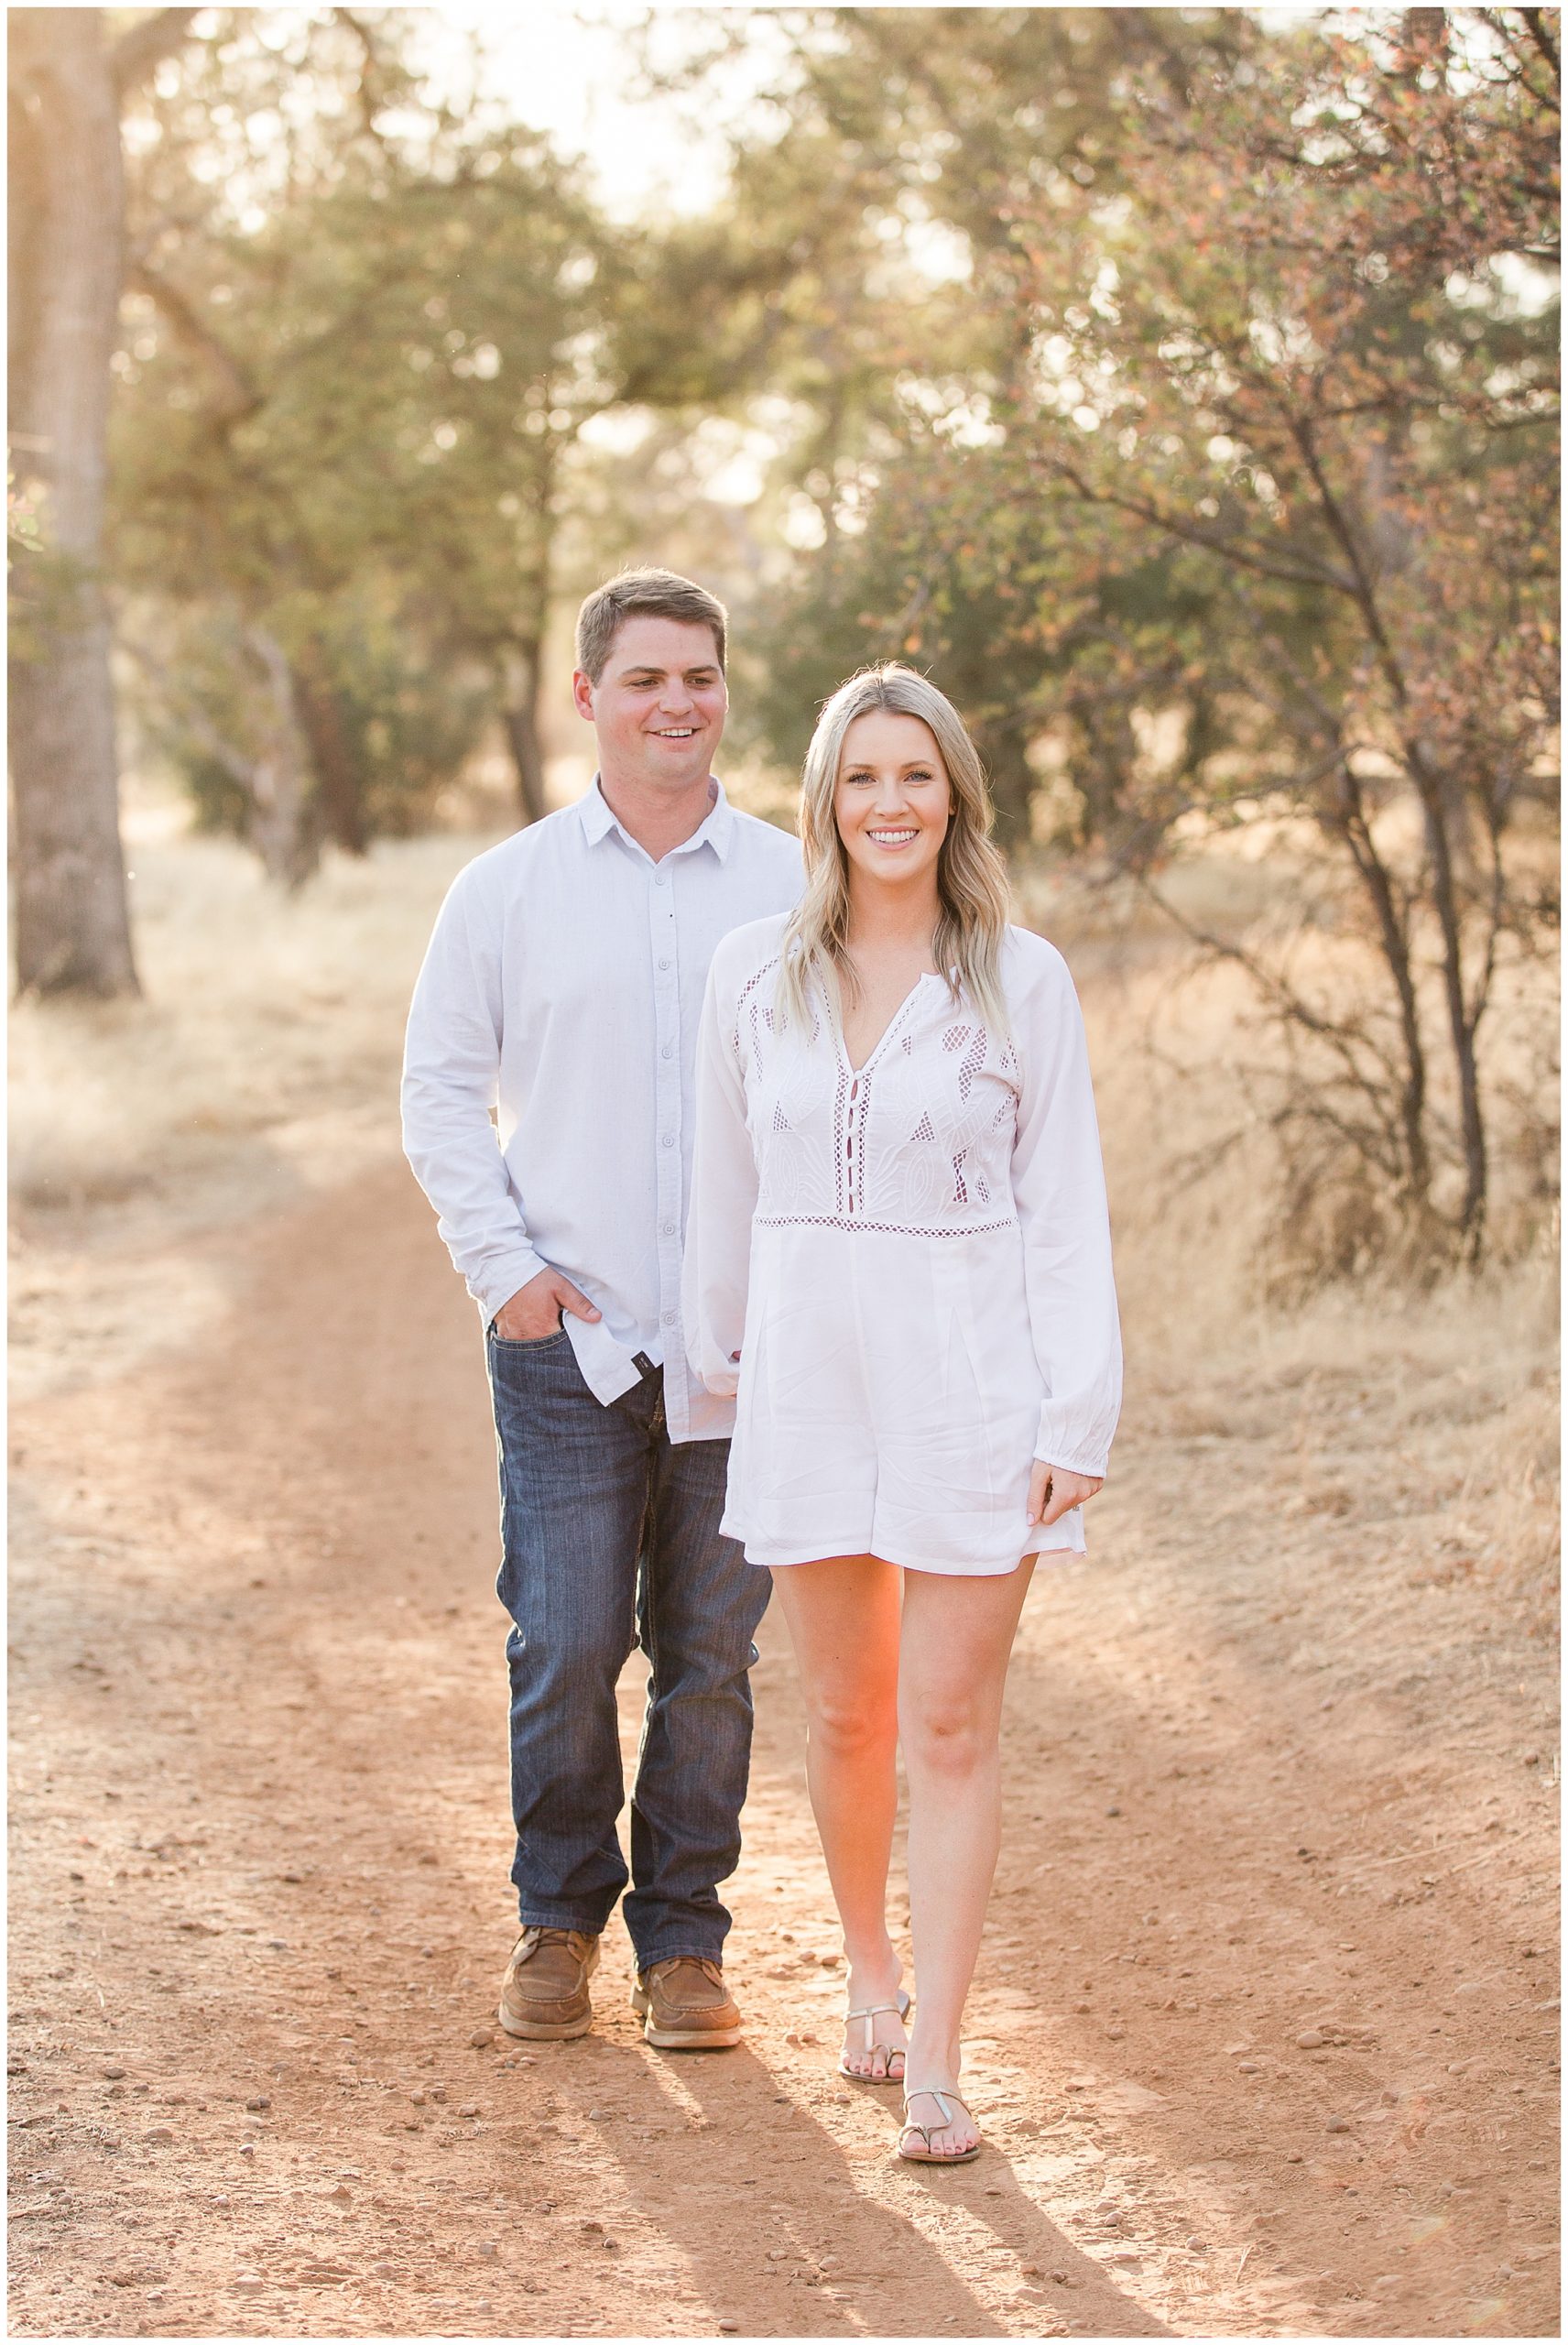 Walk in Bidwell Park Engagement Session | Emily + Tucker